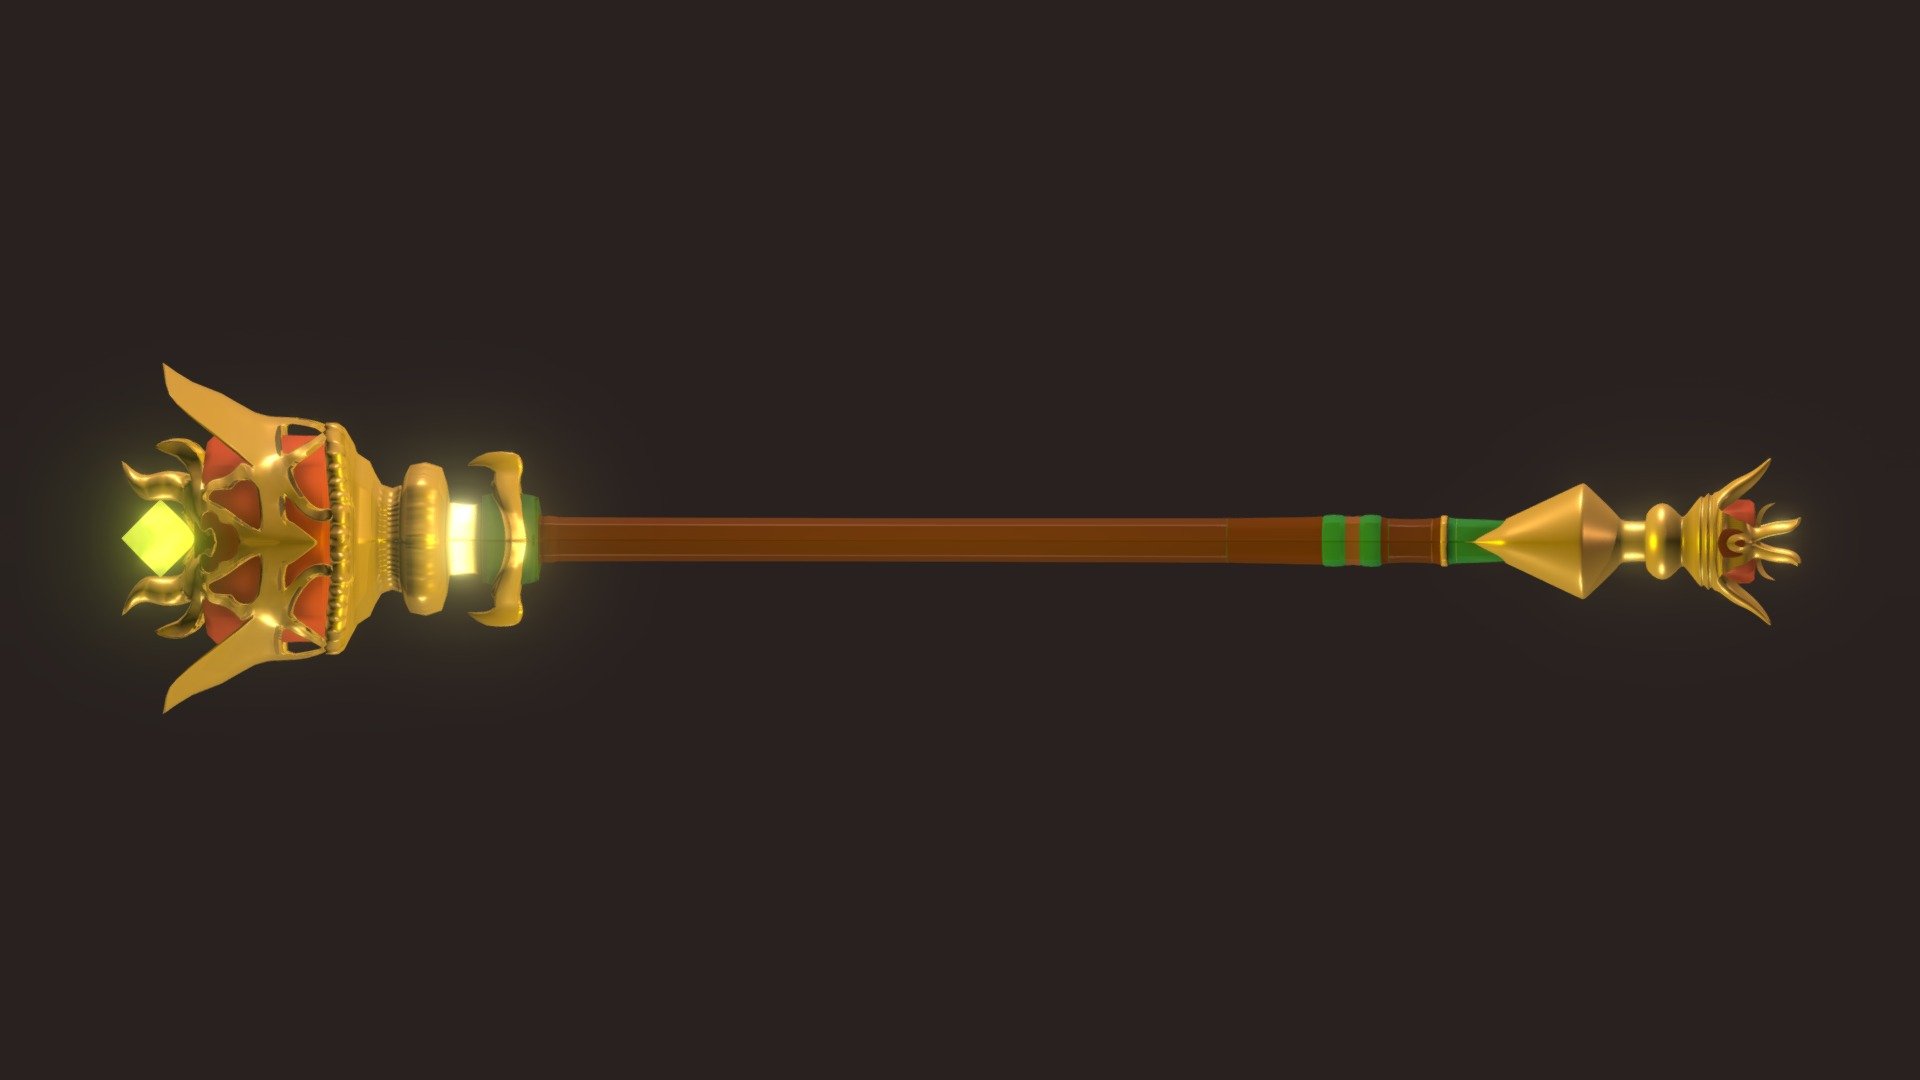 A scepter model, based on art in the D&amp;D 5e Dungeonmaster's Guide book. Modeled and UV mapped in Blender, with textures done in Photoshop, and testing in Unity 3d model